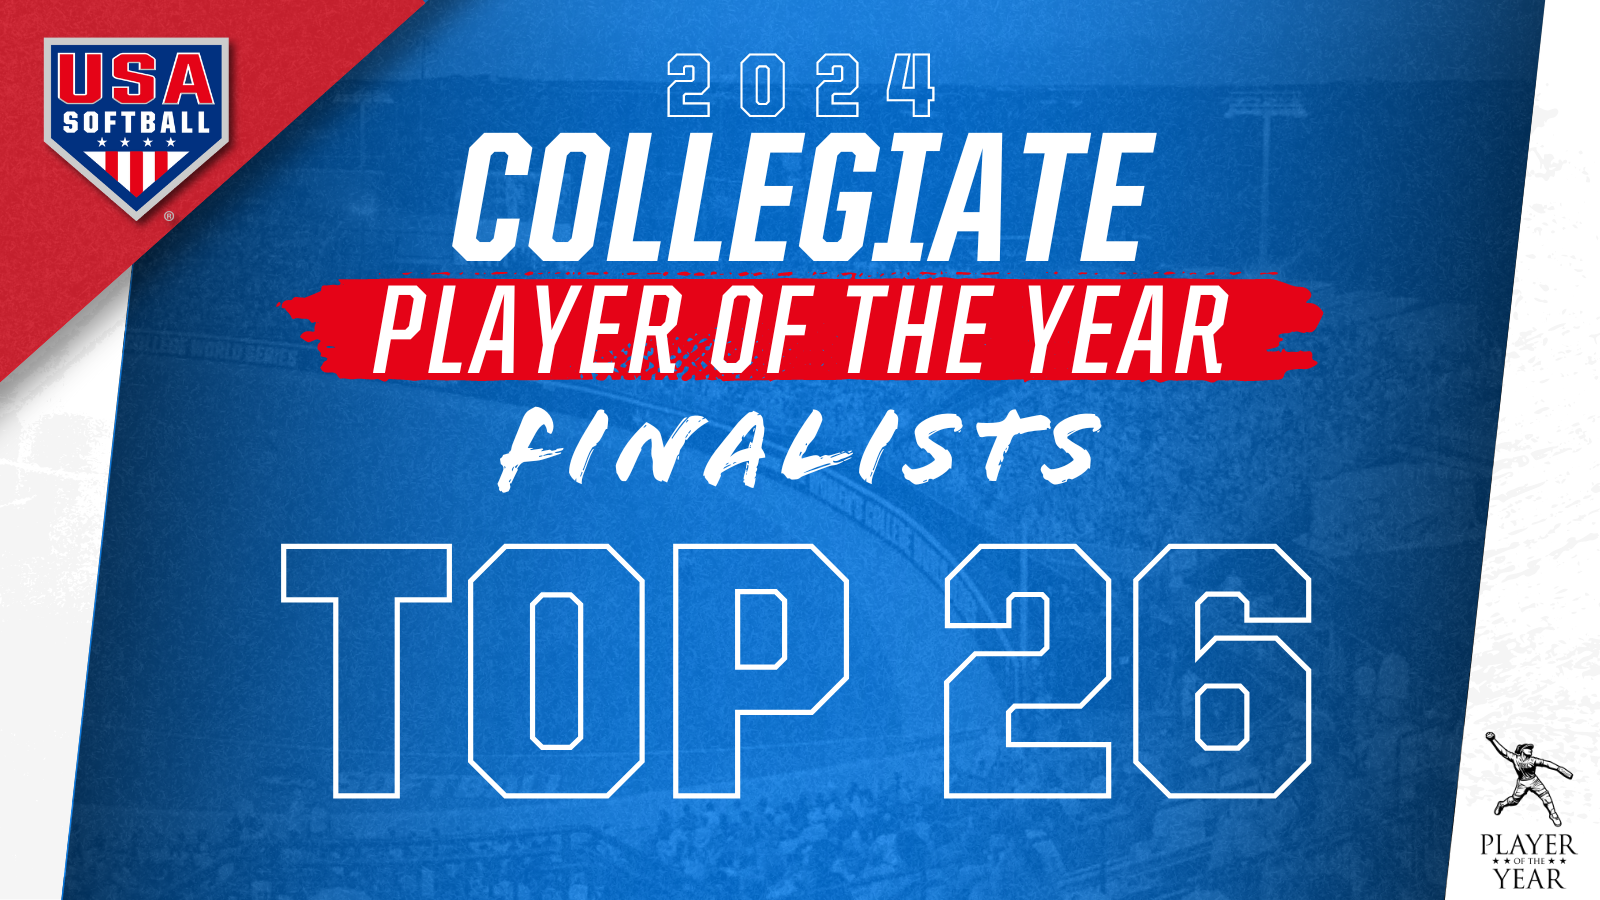 Top 26 Finalists Announced for 2024 USA Softball Collegiate Player of the Year featured image